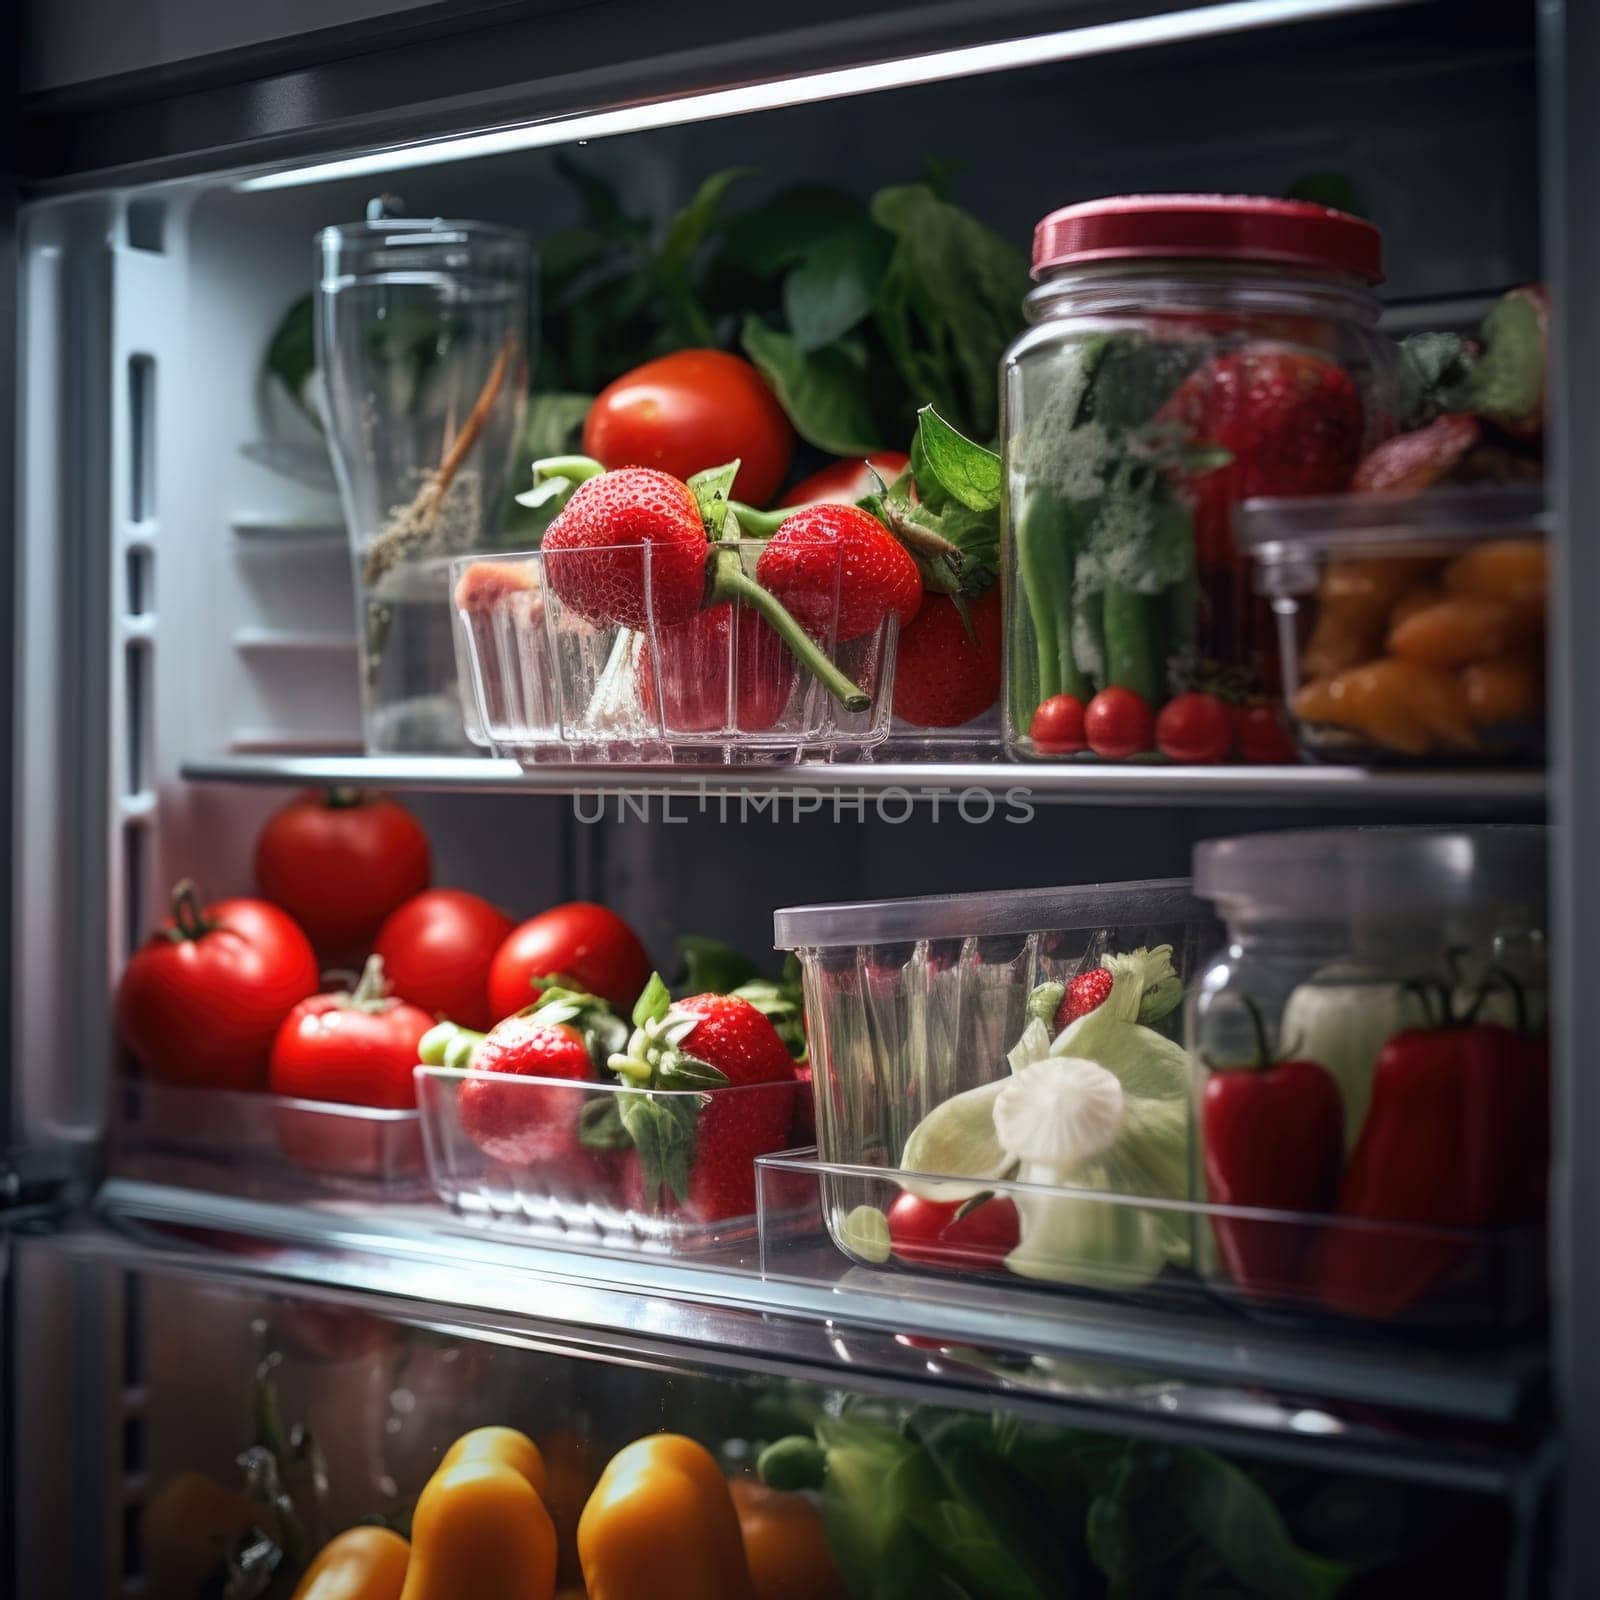 A refrigerator with fresh vegetables and fruits inside